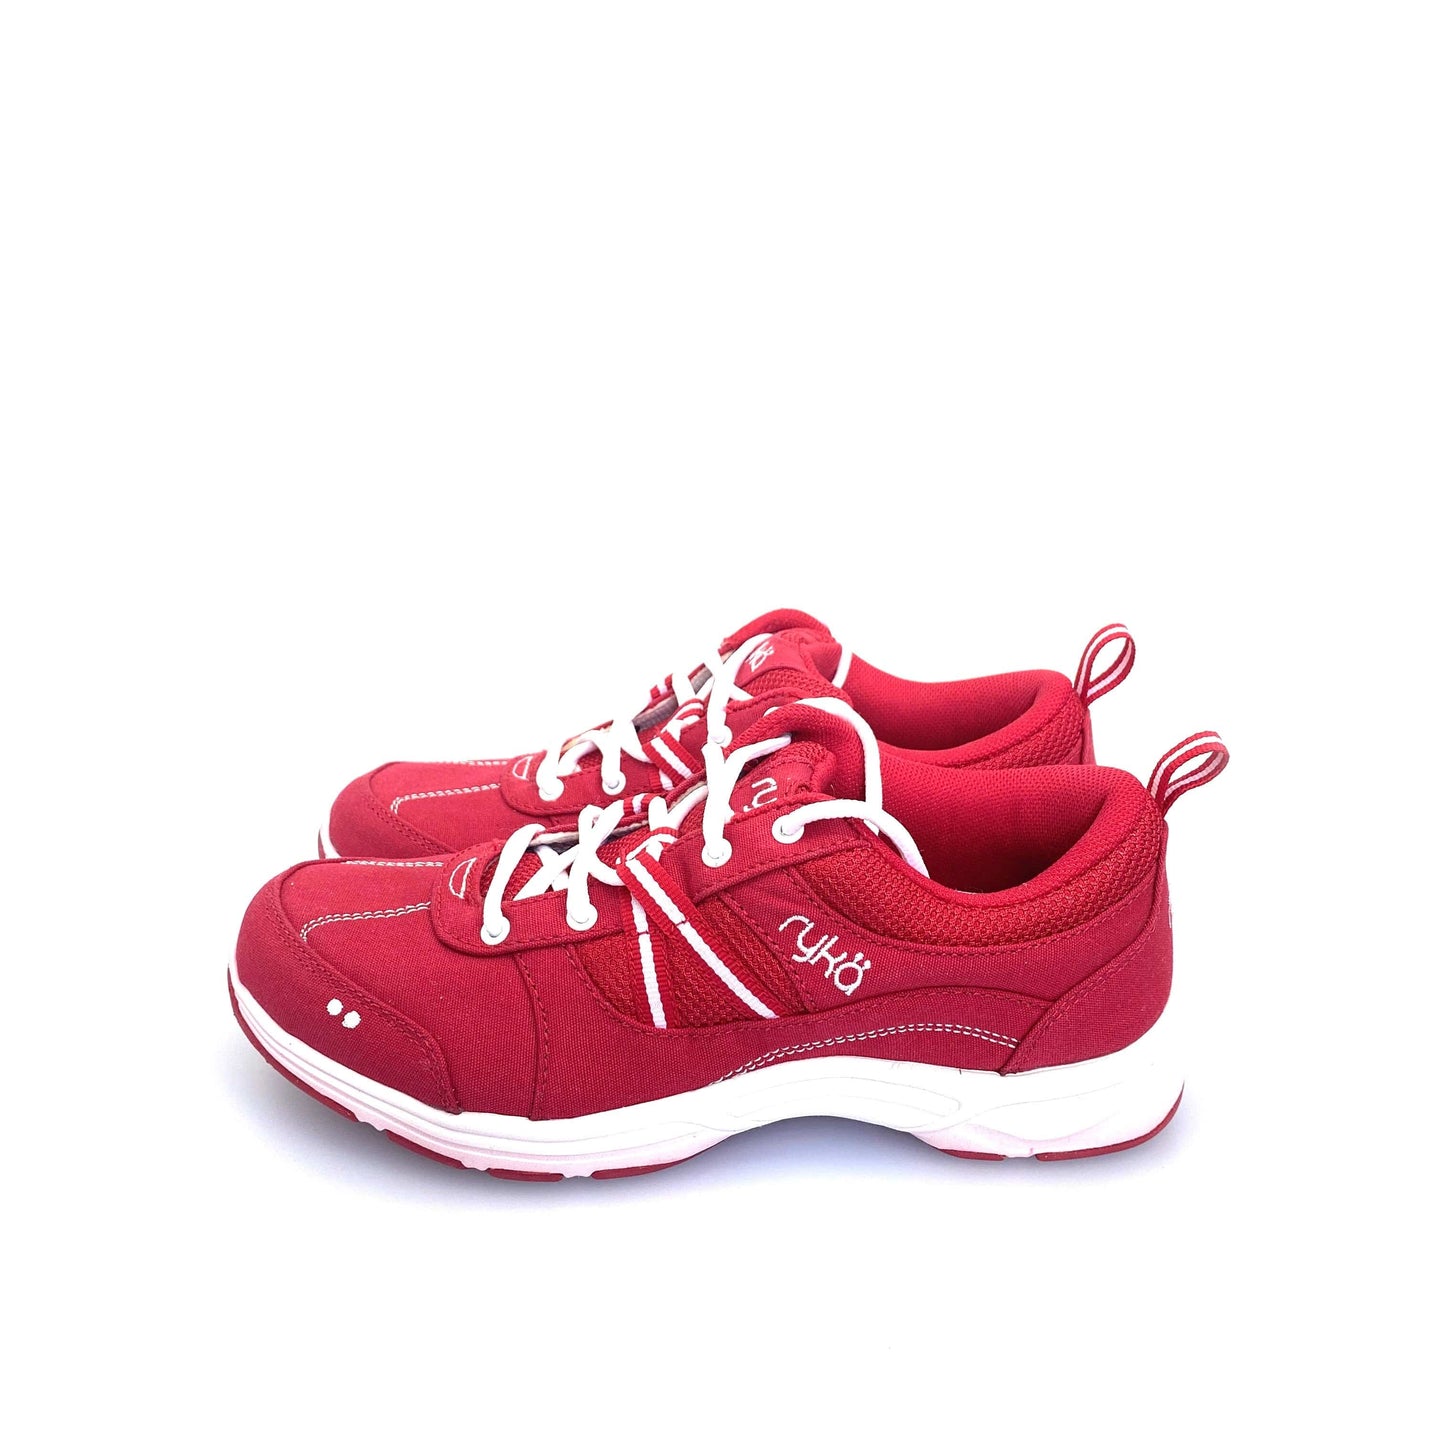 Rykä Crimson Red Tempo Walking Shoe, Size 6.5M Red/White Lace Up Shoes NEW